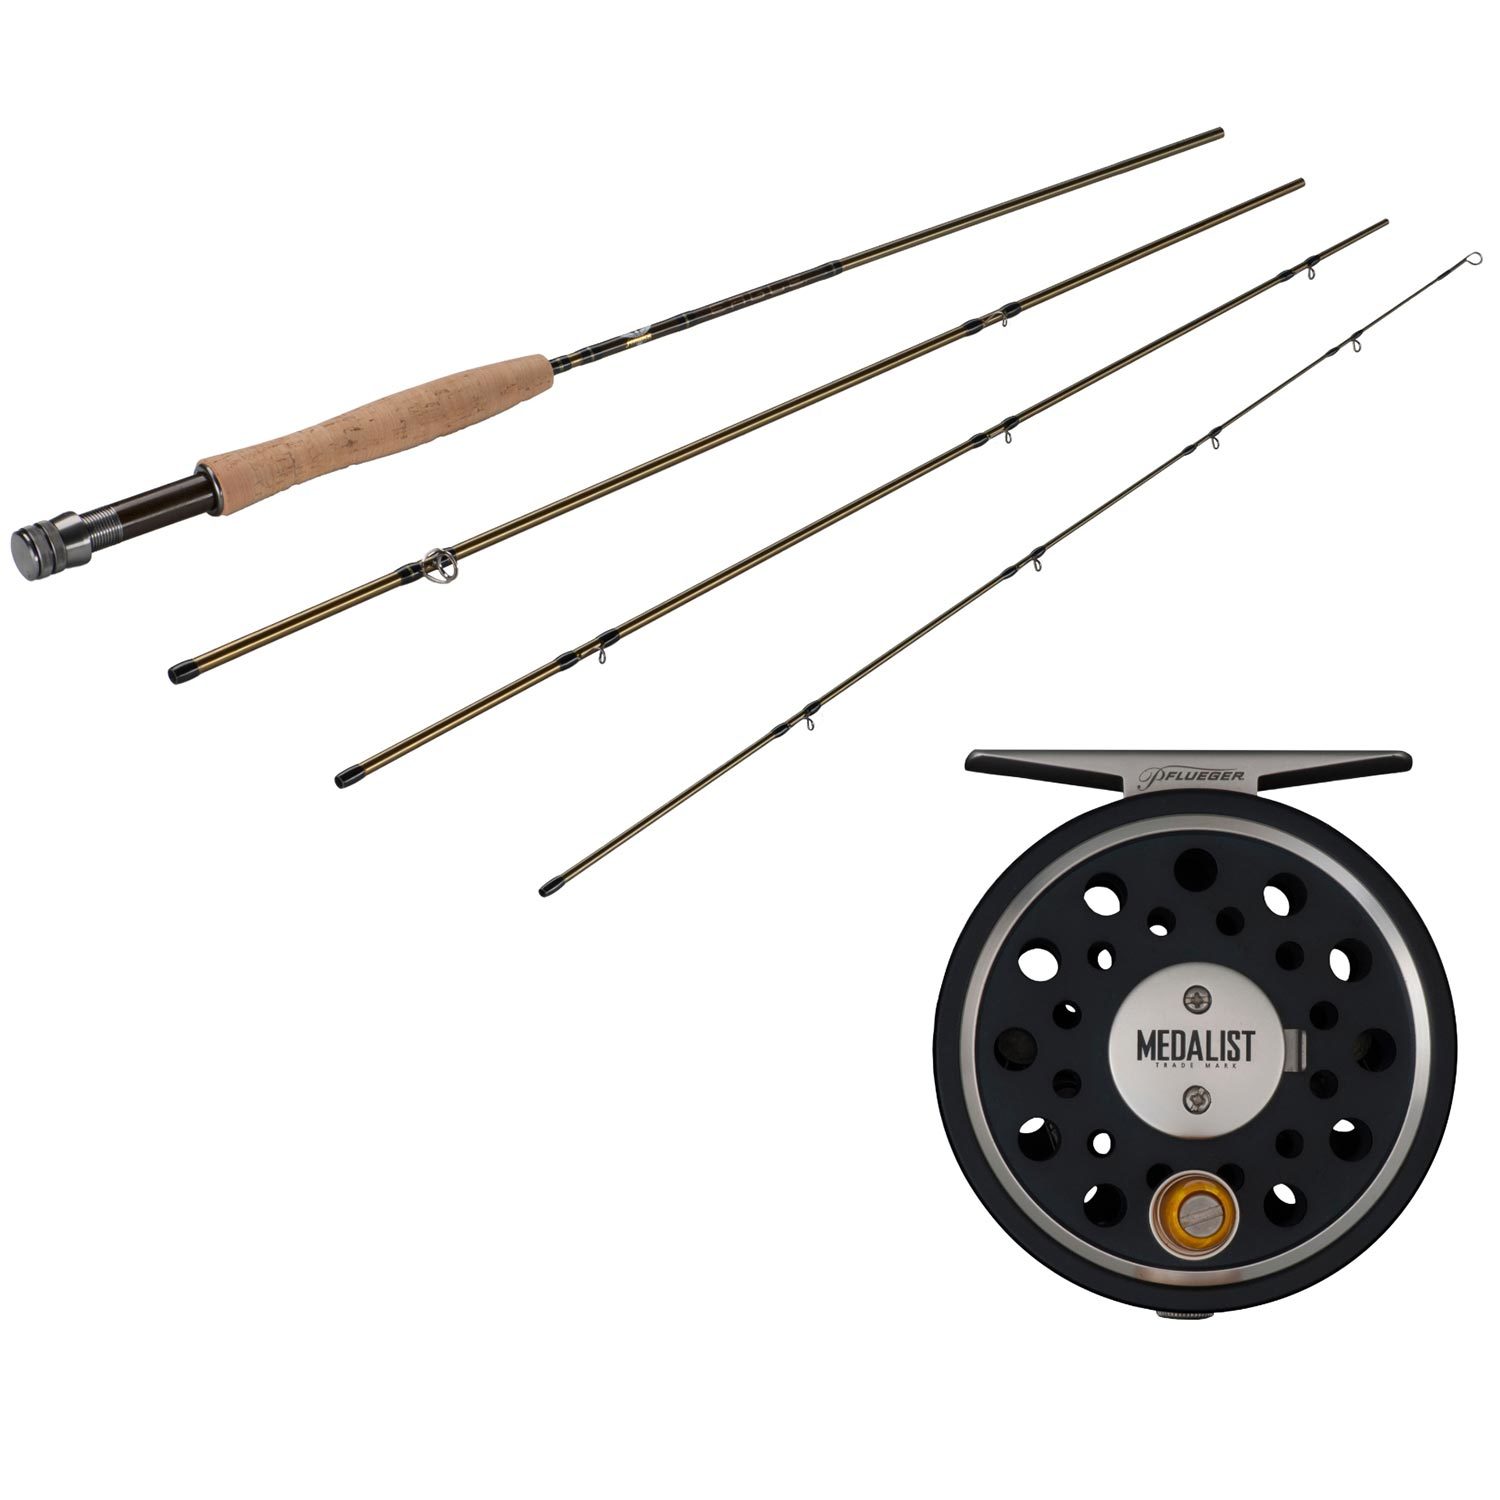 Fenwick® and Pflueger® Deliver a New Portfolio Featuring Stronger Fly Rods  and Lighter Fly Reels